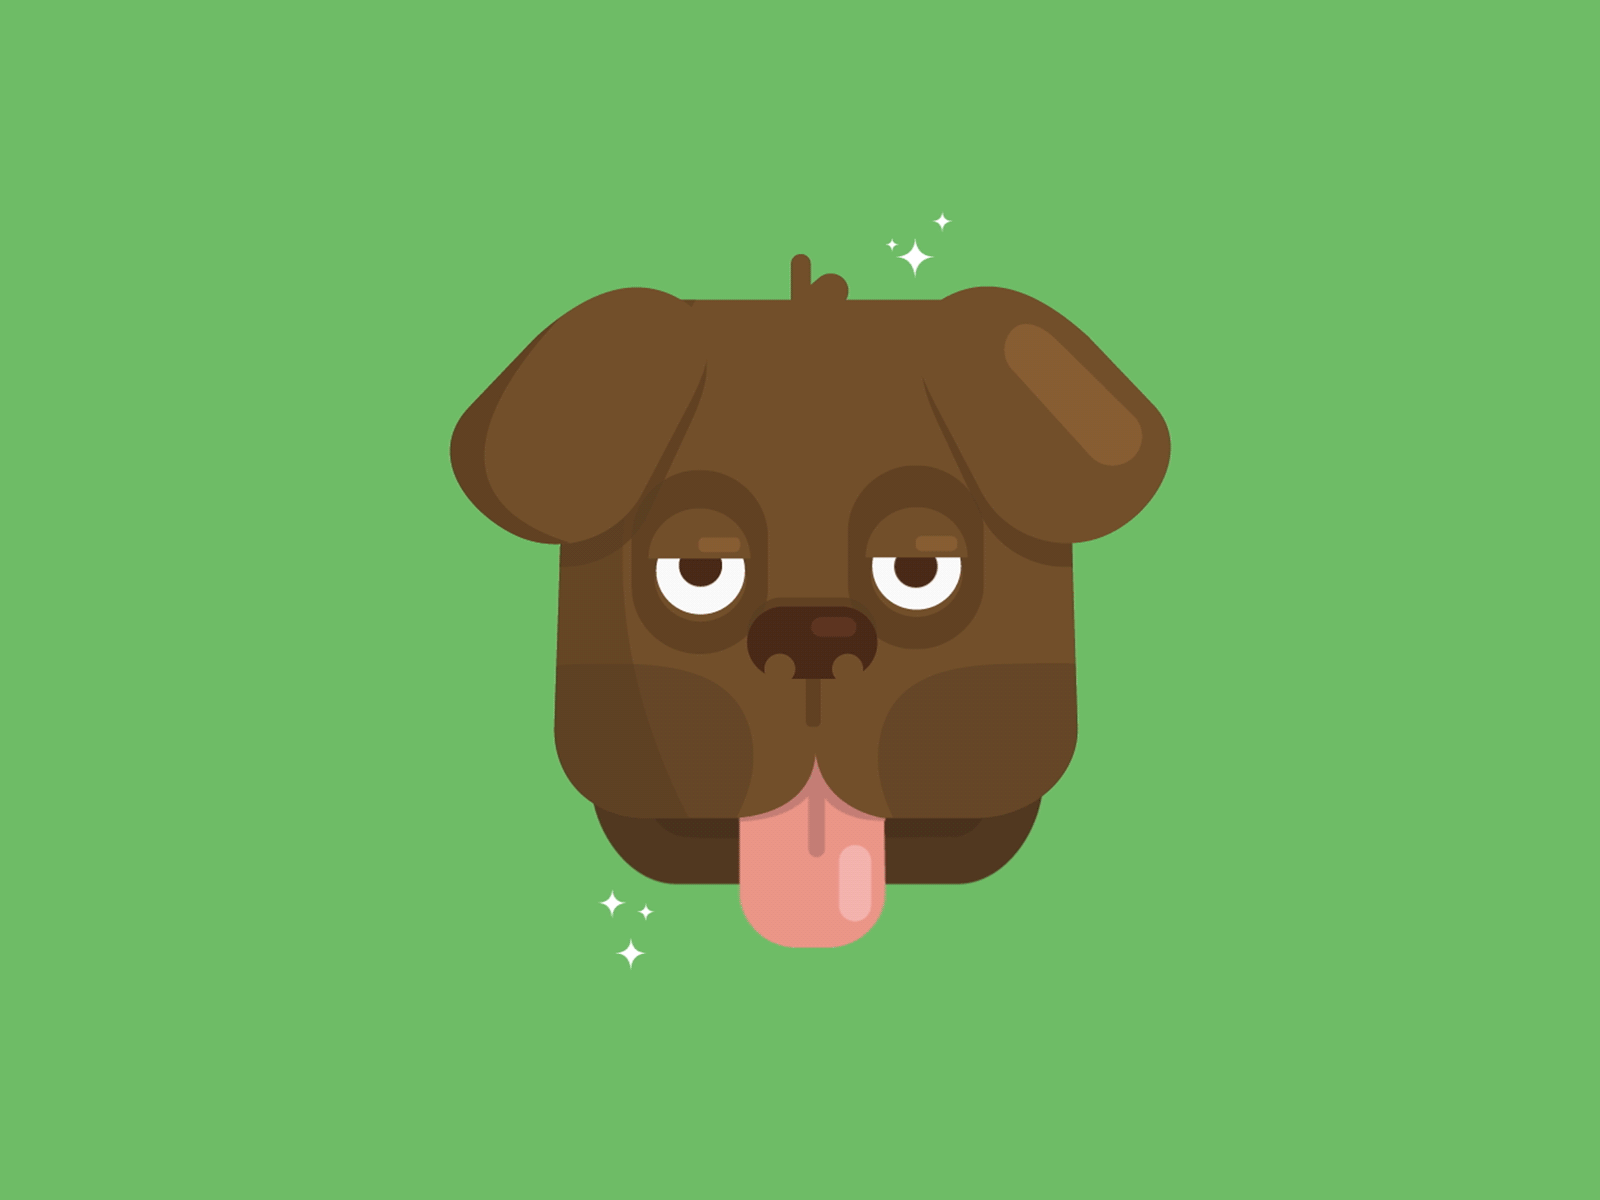 Dogs being Dogs after effects animation cartoon illustration character animation character design dog dog illustration dog lover dogs geometric illustration illustration motion graphics